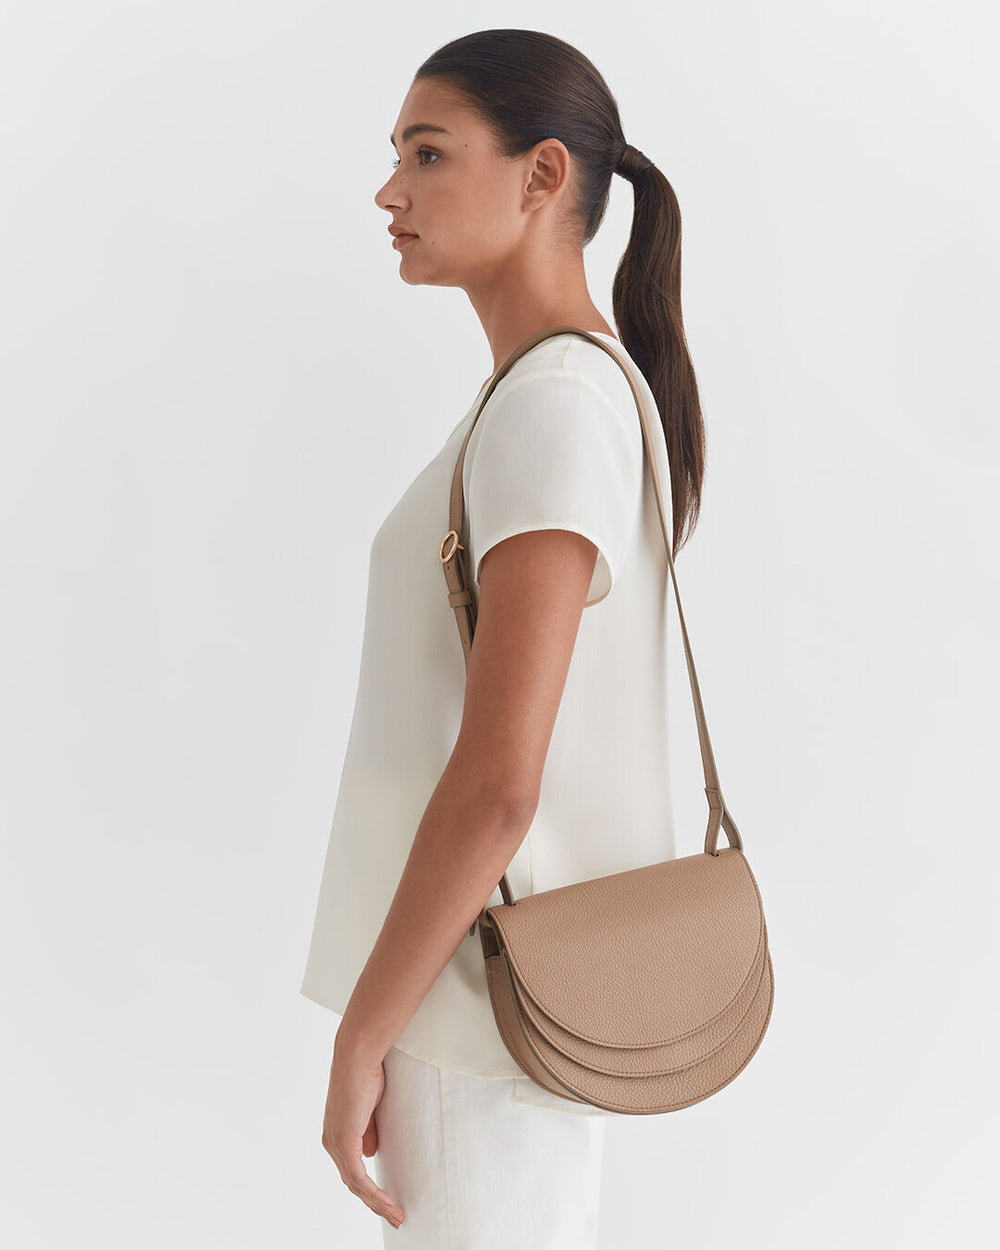 Woman with ponytail carrying a shoulder bag, side view.